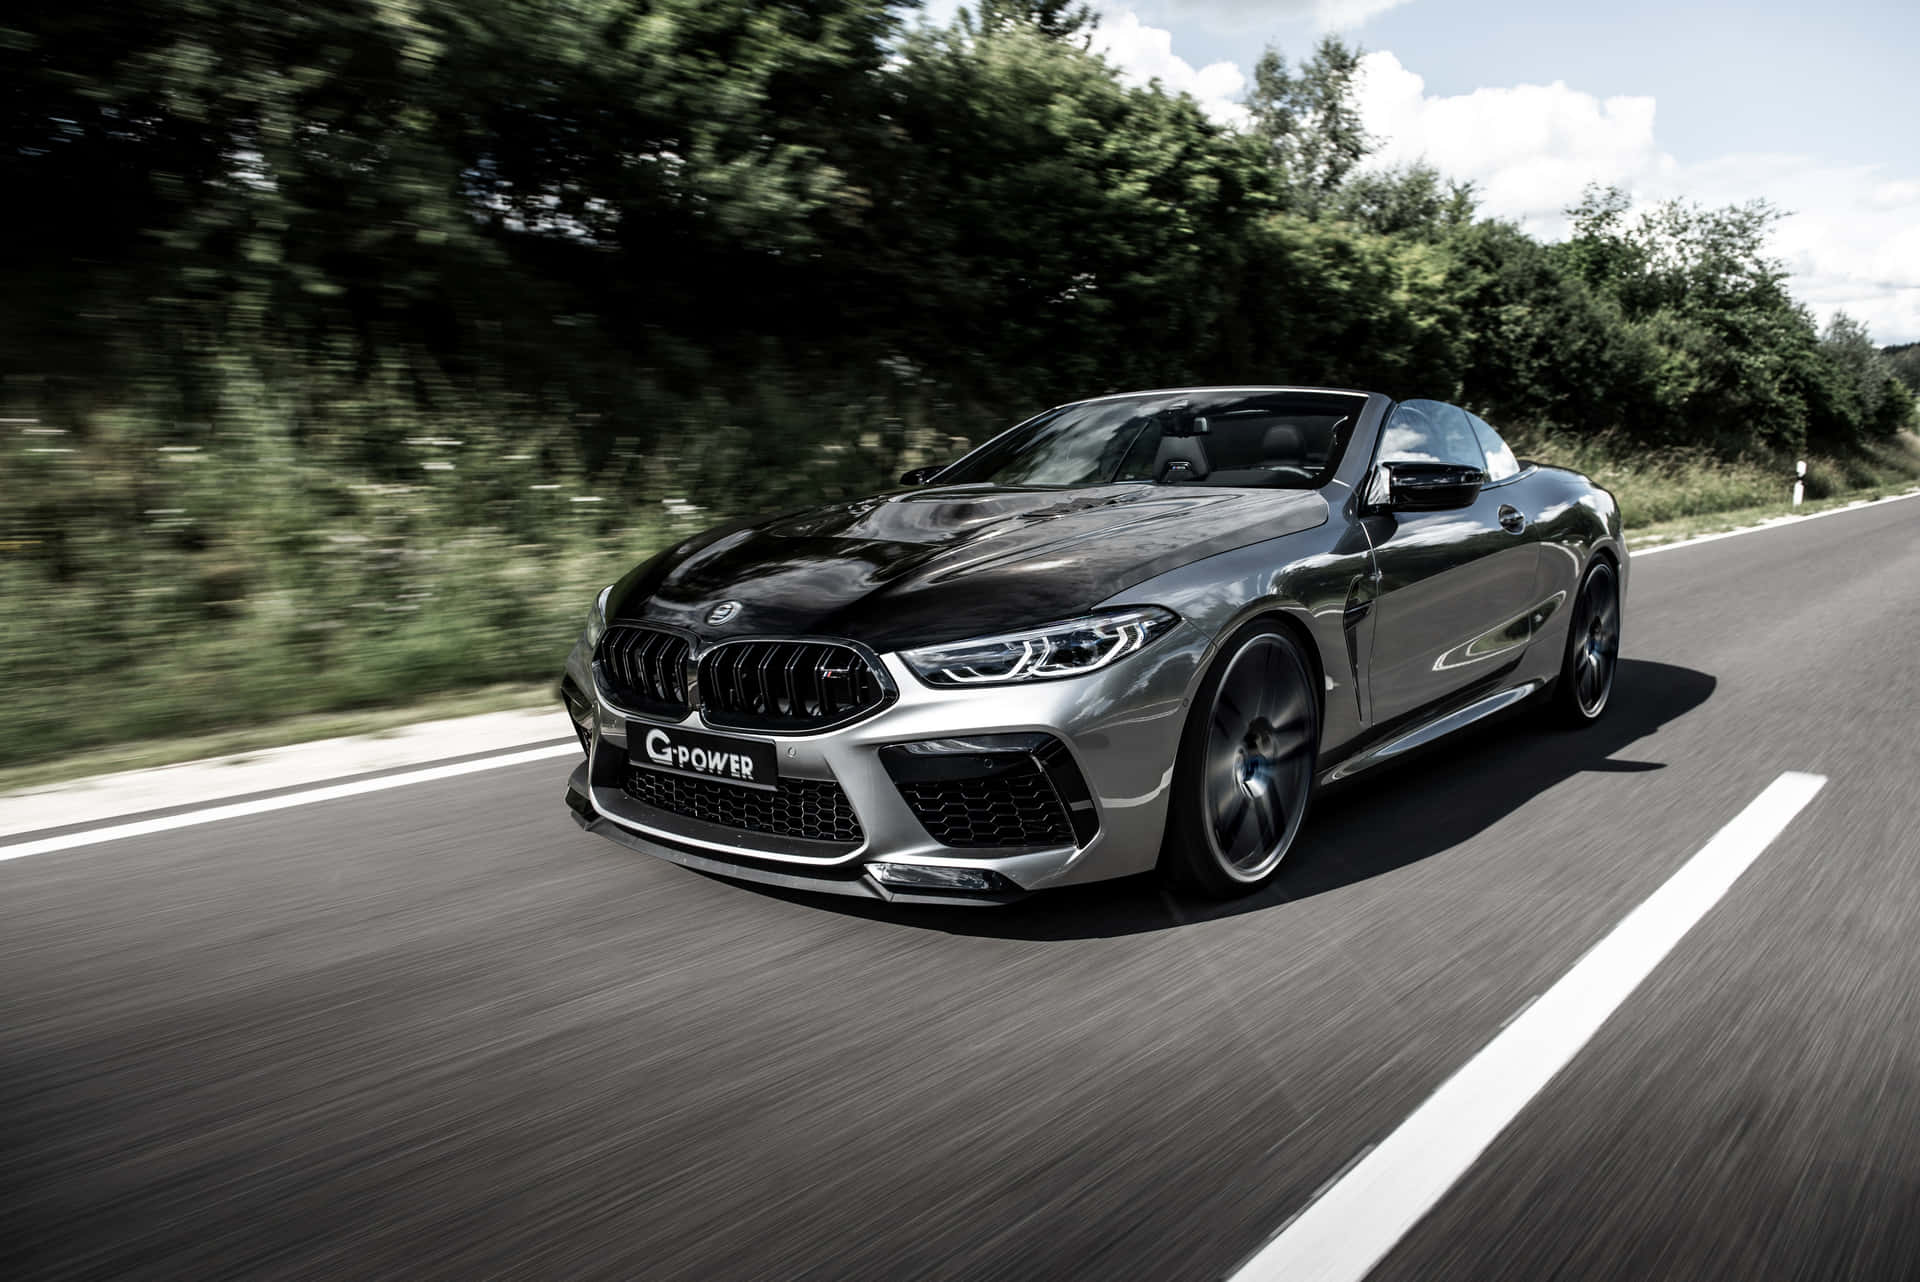 Silver-gray Bmw M8 On The Road 4k Wallpaper